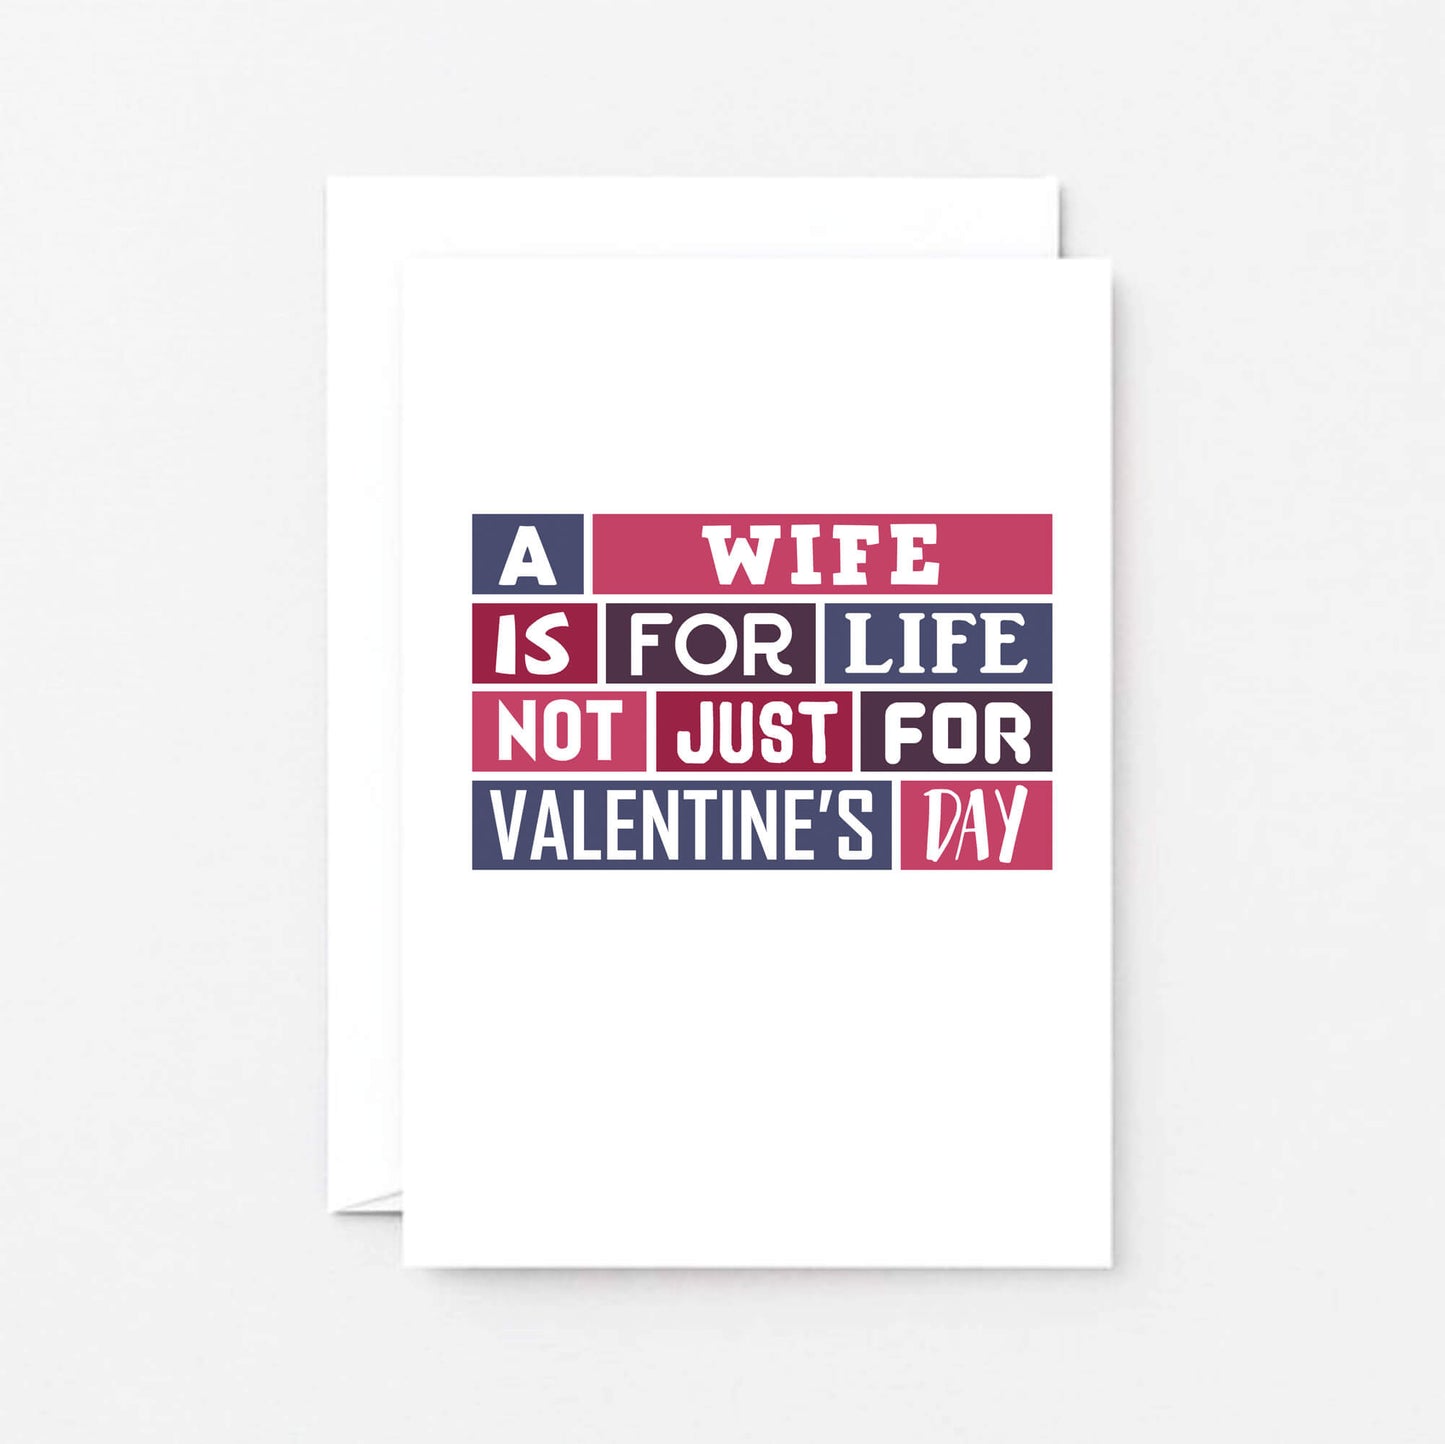 Valentine Card by SixElevenCreations. Card reads A wife is for life Not just for Valentine's Day. Product Code SEV0015A6